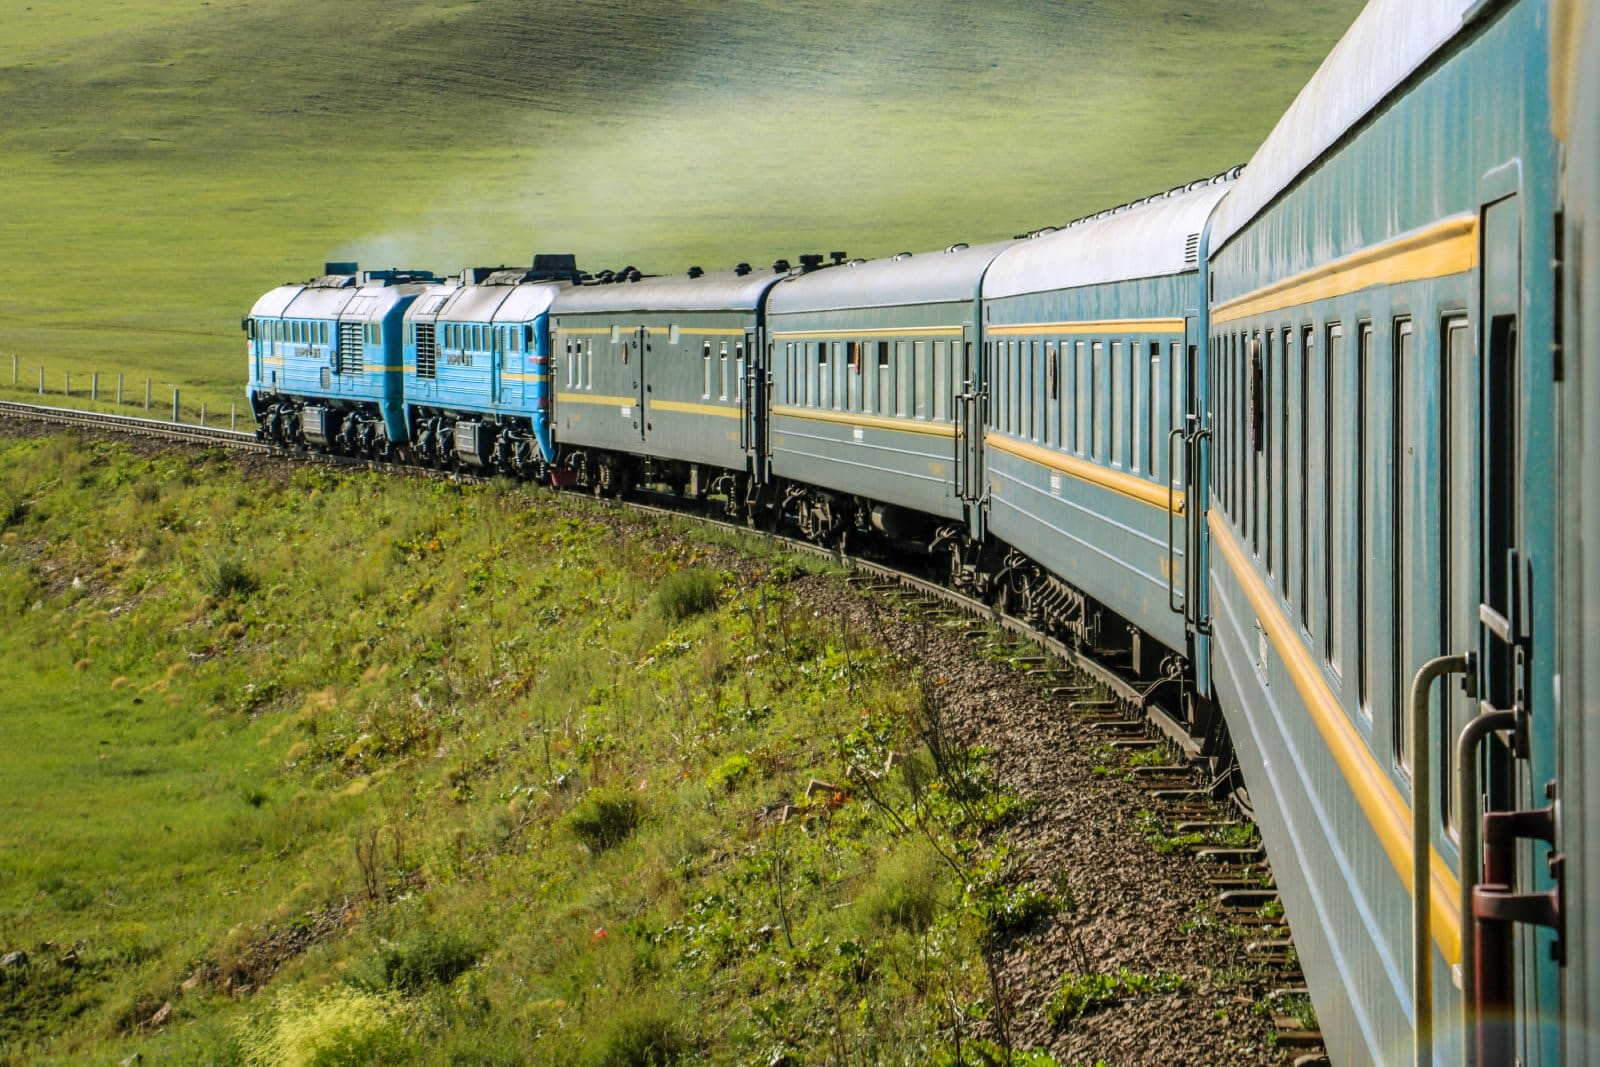 <p class="wp-caption-text">Image Credit: Shutterstock / Yannik Photography</p>  <p><span>The Trans-Siberian Railway, stretching over 9,000 kilometers from Moscow to Vladivostok, is the longest railway line in the world and offers one of the most iconic rail journeys. This epic voyage crosses eight time zones and offers a window into Russia’s vast and varied landscapes, from the dense forests of Siberia to the majestic Ural Mountains and the expansive steppes. Travelers can explore historic cities, experience Russia’s rich cultures and traditions, and interact with locals in remote communities. The journey can be customized with stops in cities like Yekaterinburg, Irkutsk, and the stunning Lake Baikal, the deepest freshwater lake in the world.</span></p>